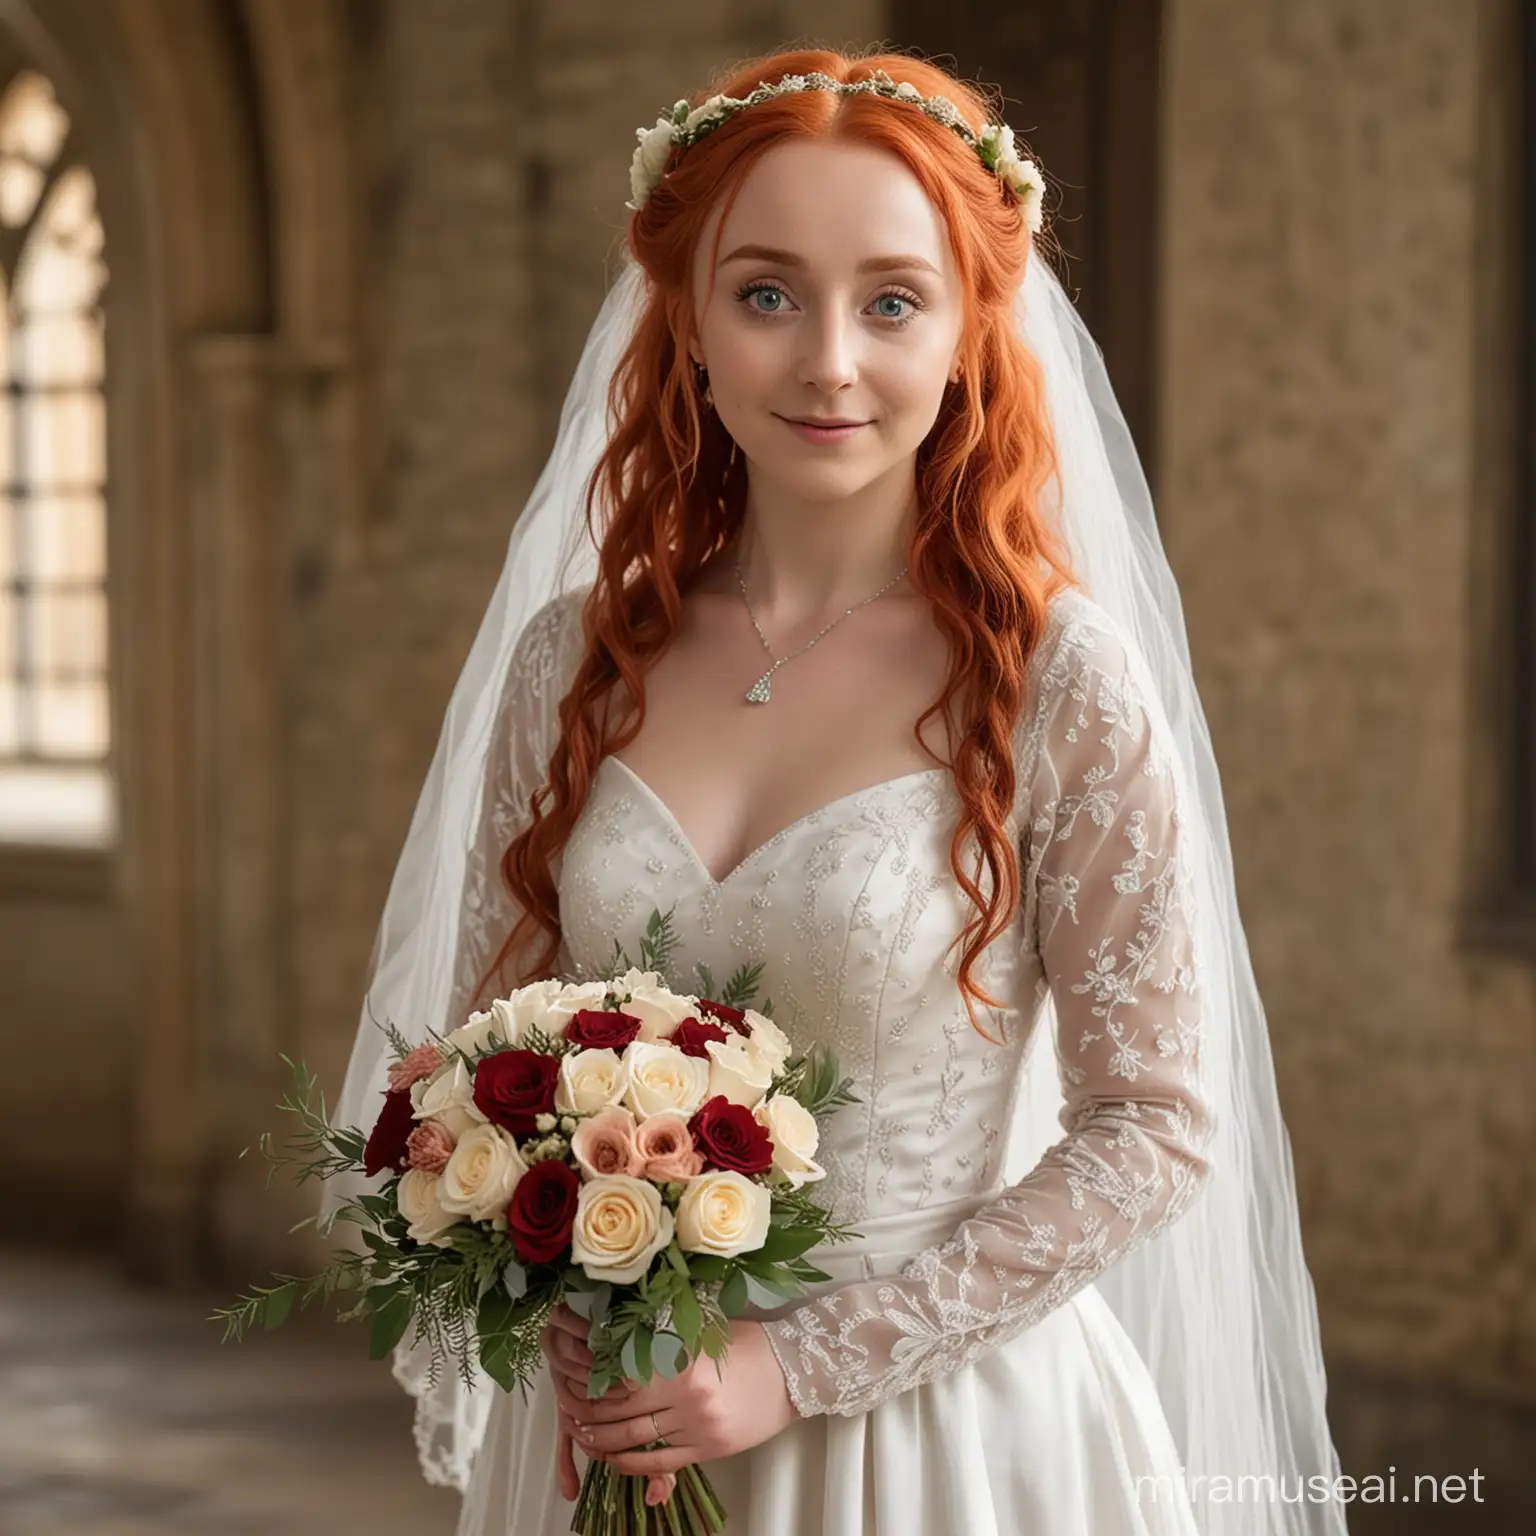 Red-haired Luna Lovegood in a beautiful bride's outfit holds a bouquet